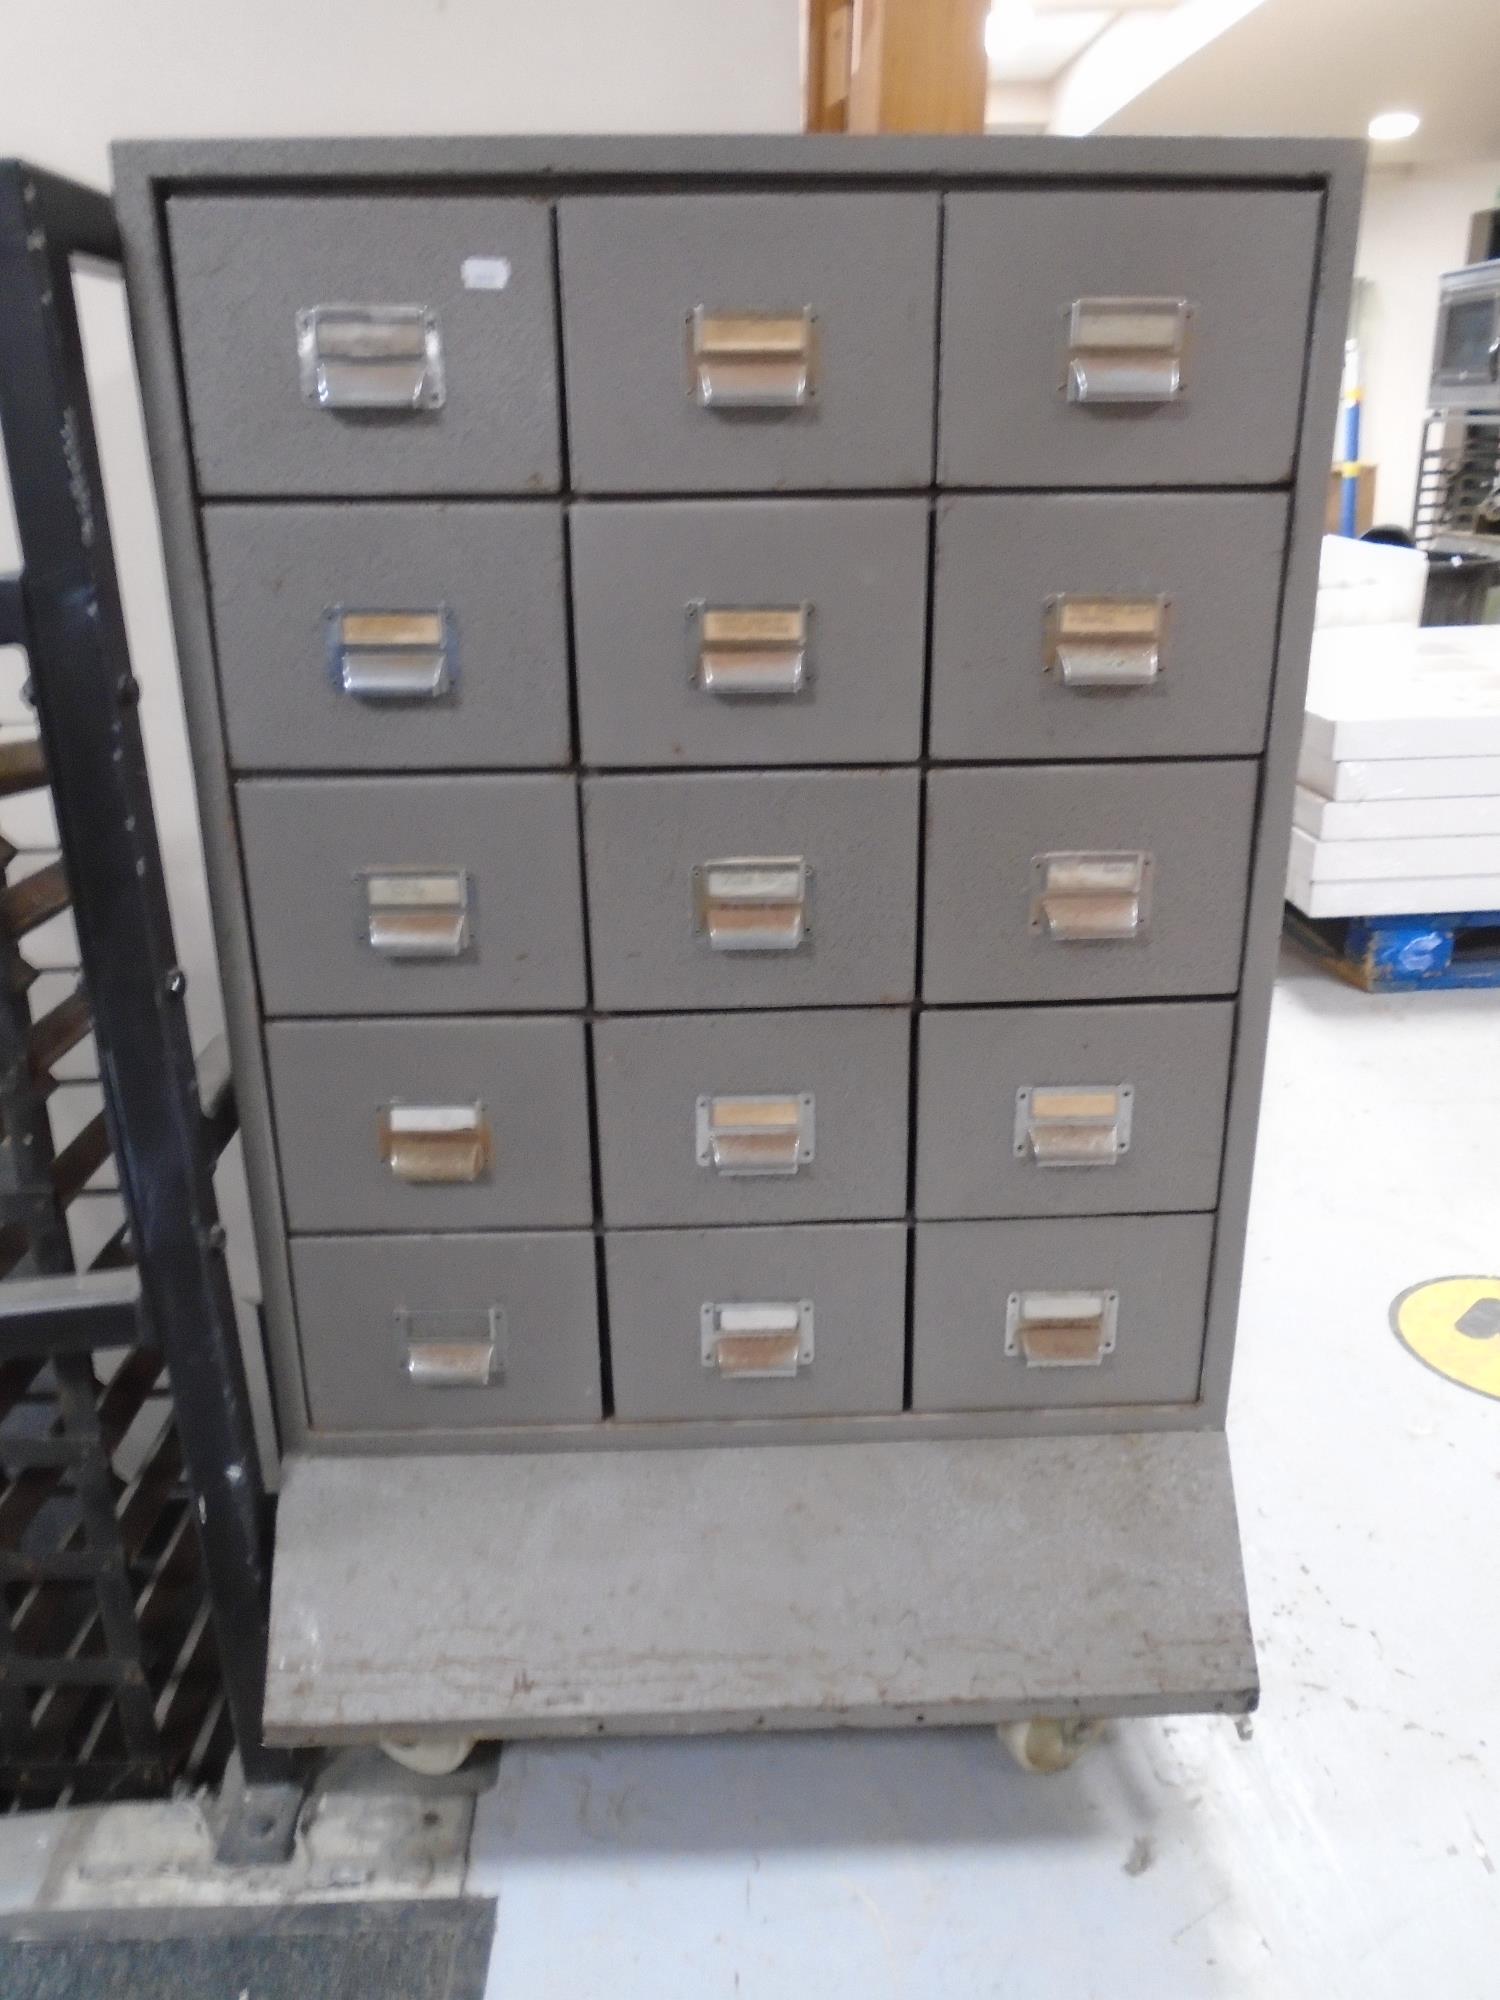 A 20th century fifteen drawer metal industrial style filing chest on castors.